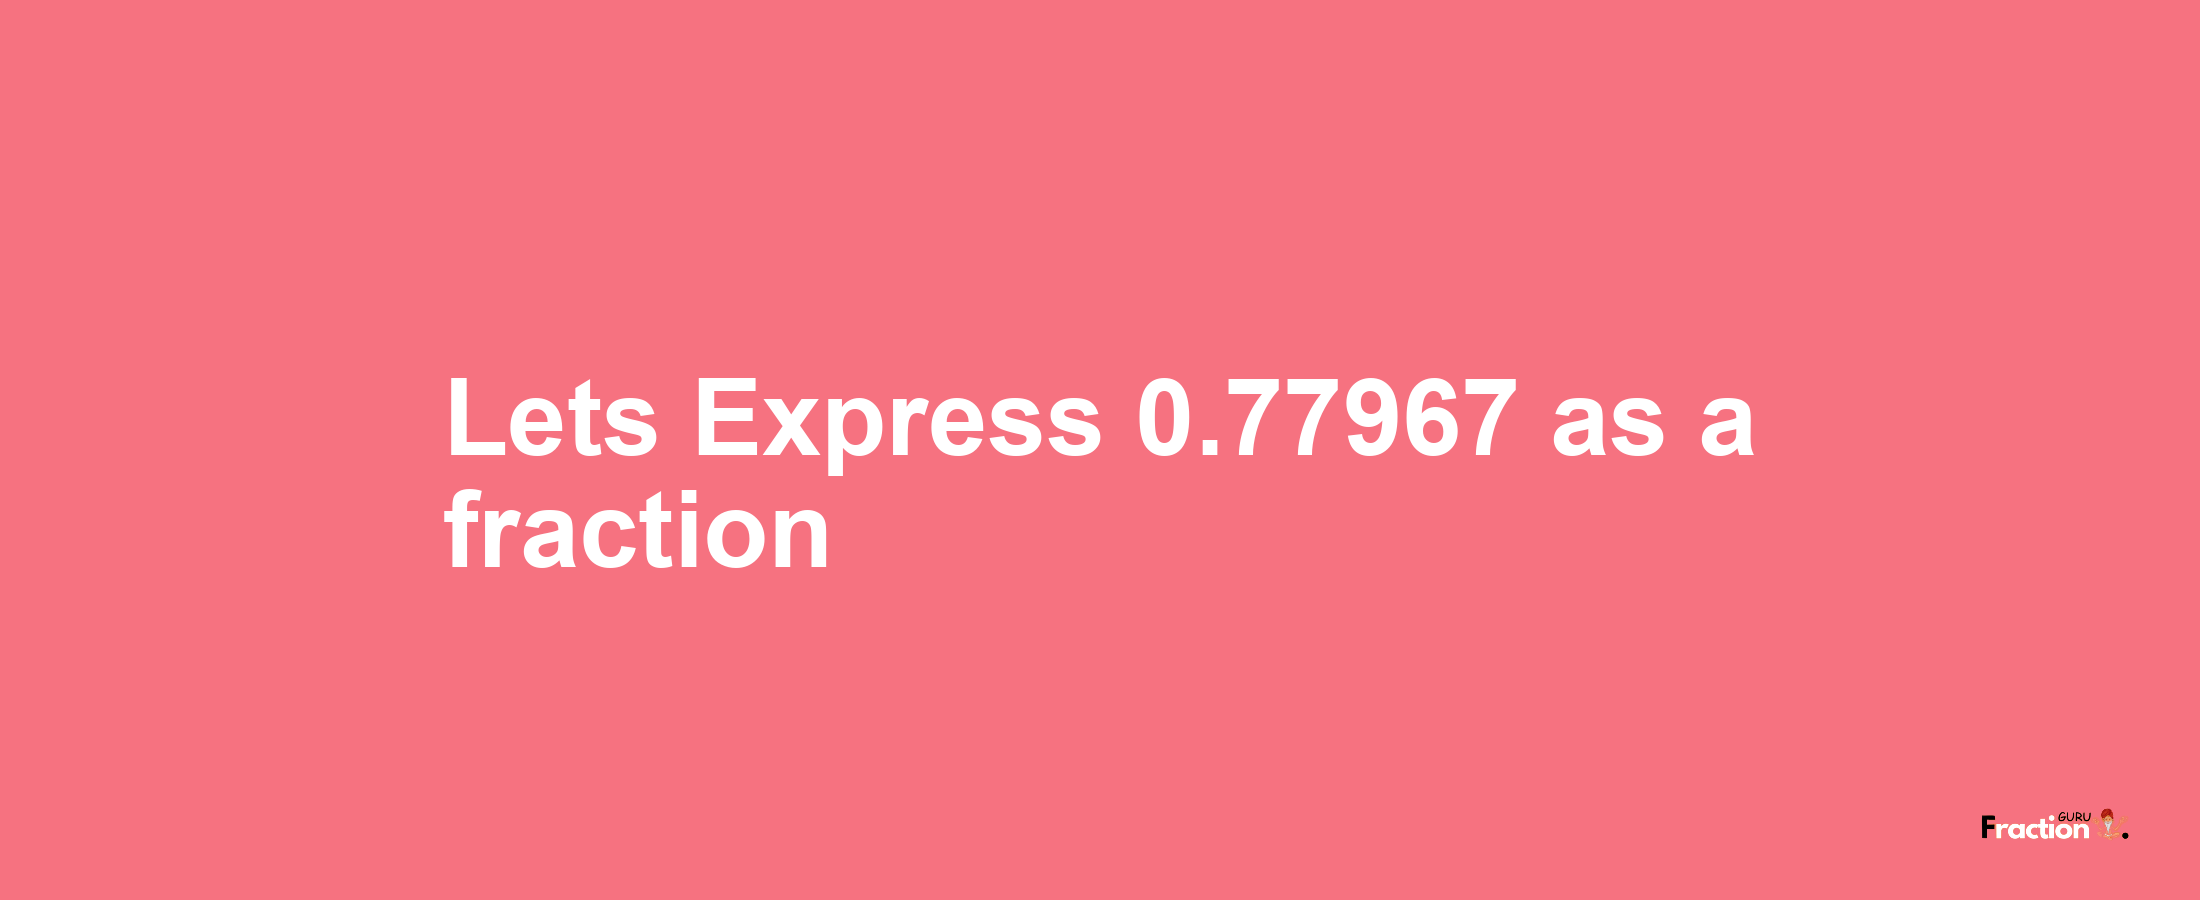 Lets Express 0.77967 as afraction